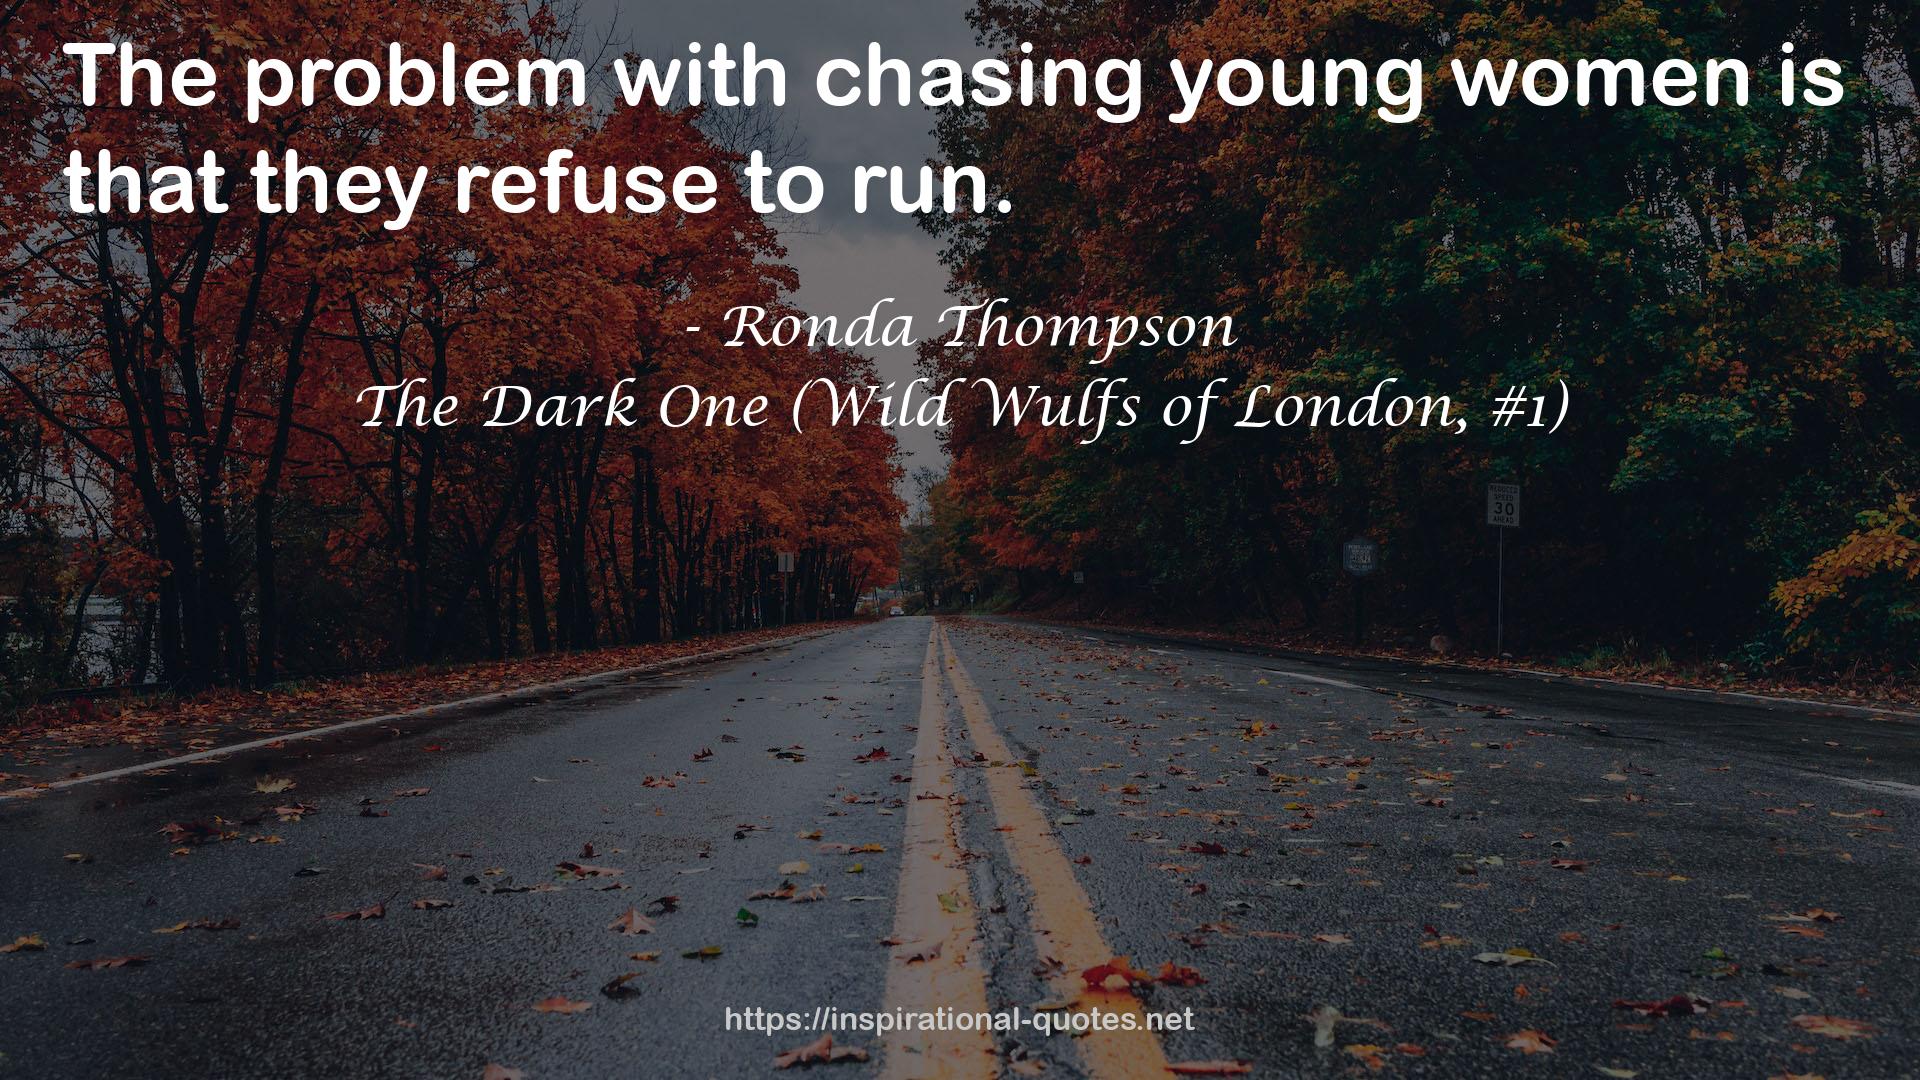 The Dark One (Wild Wulfs of London, #1) QUOTES